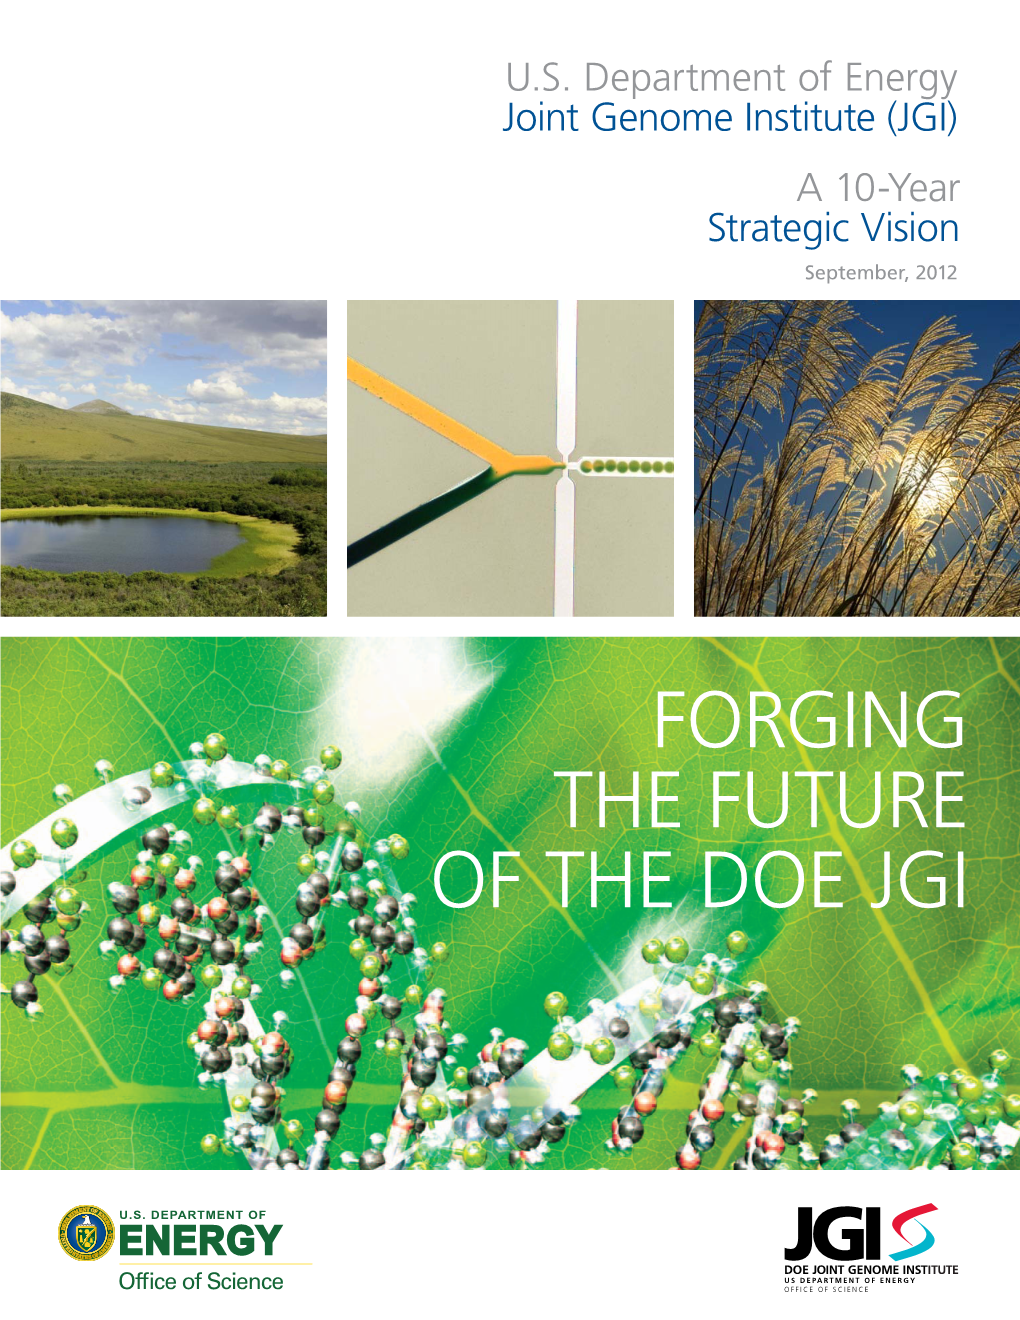 FORGING the FUTURE of the DOE JGI OUR VISION the User Facility Pioneering Functional Genomics to Solve the Most Relevant Bioenergy and Environmental Problems U.S